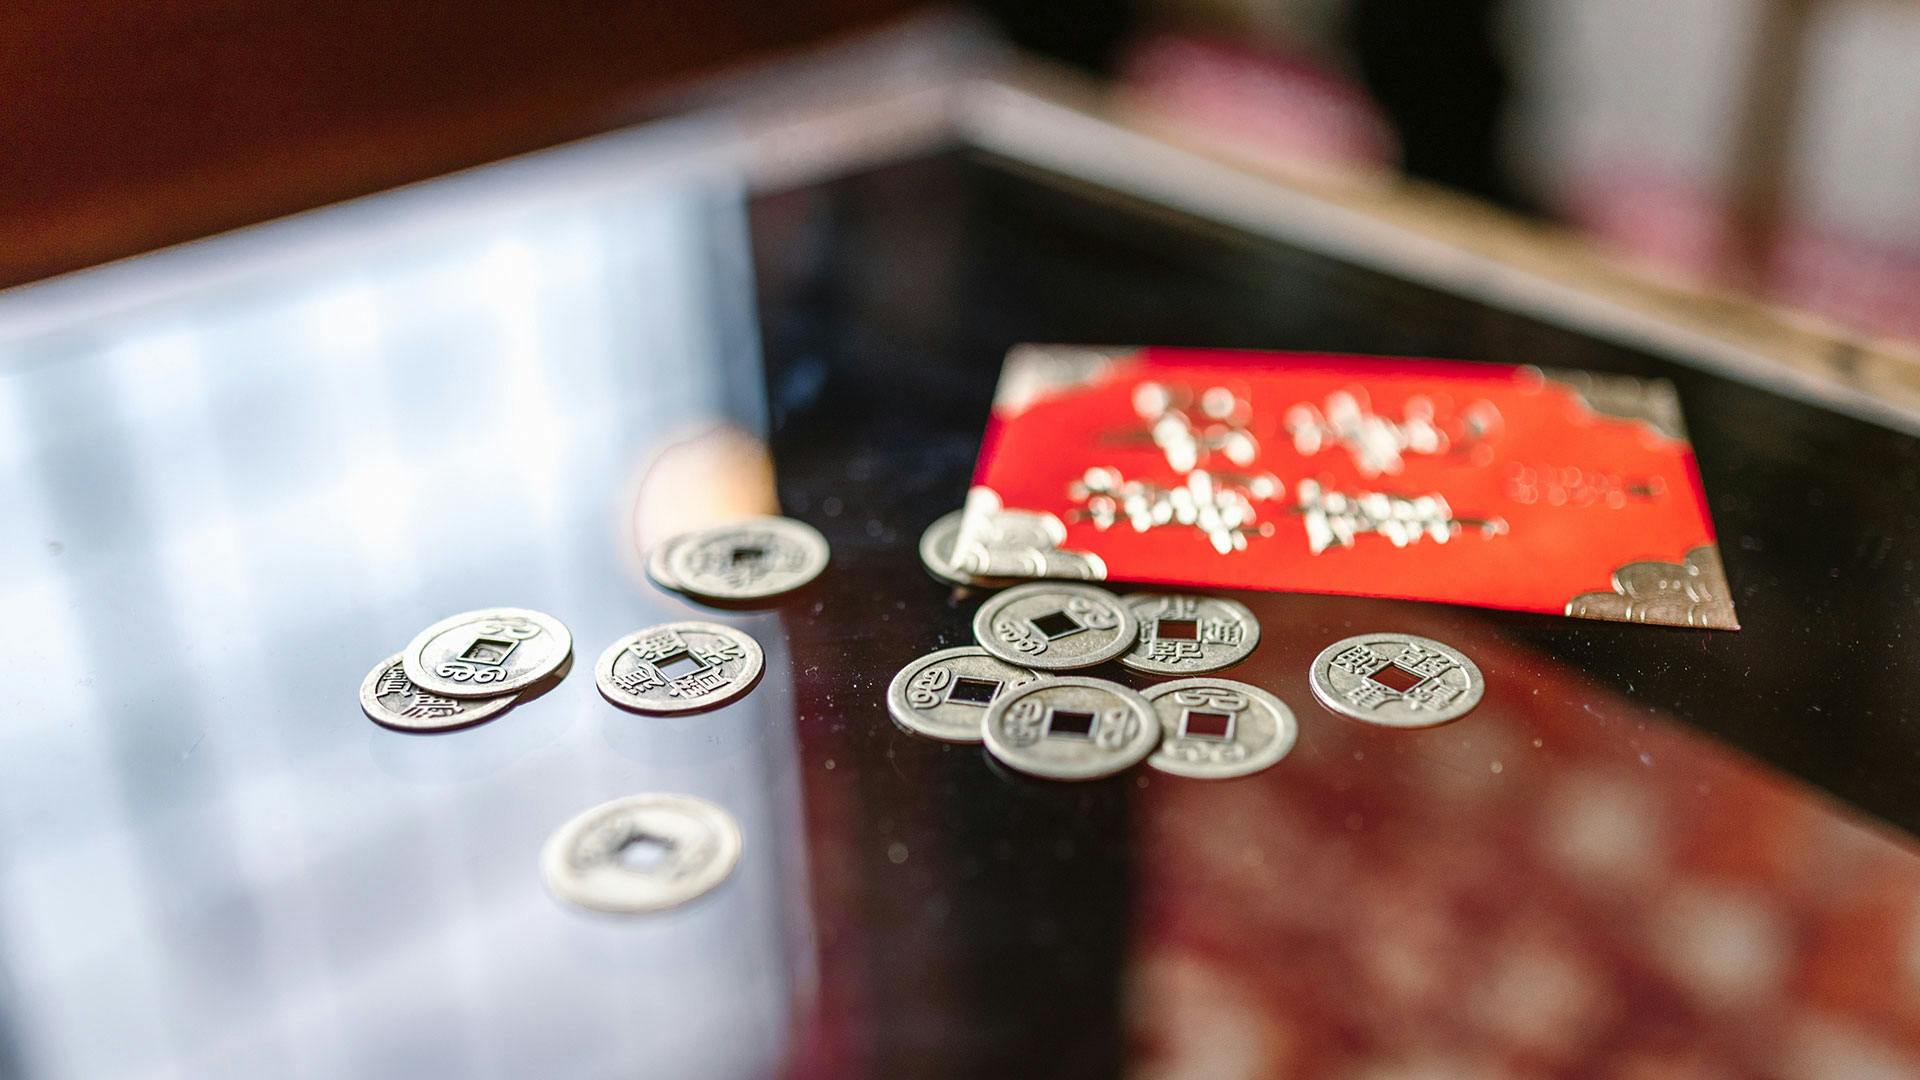 An red envelope with gold lettering on a glass table with a pile of old coins